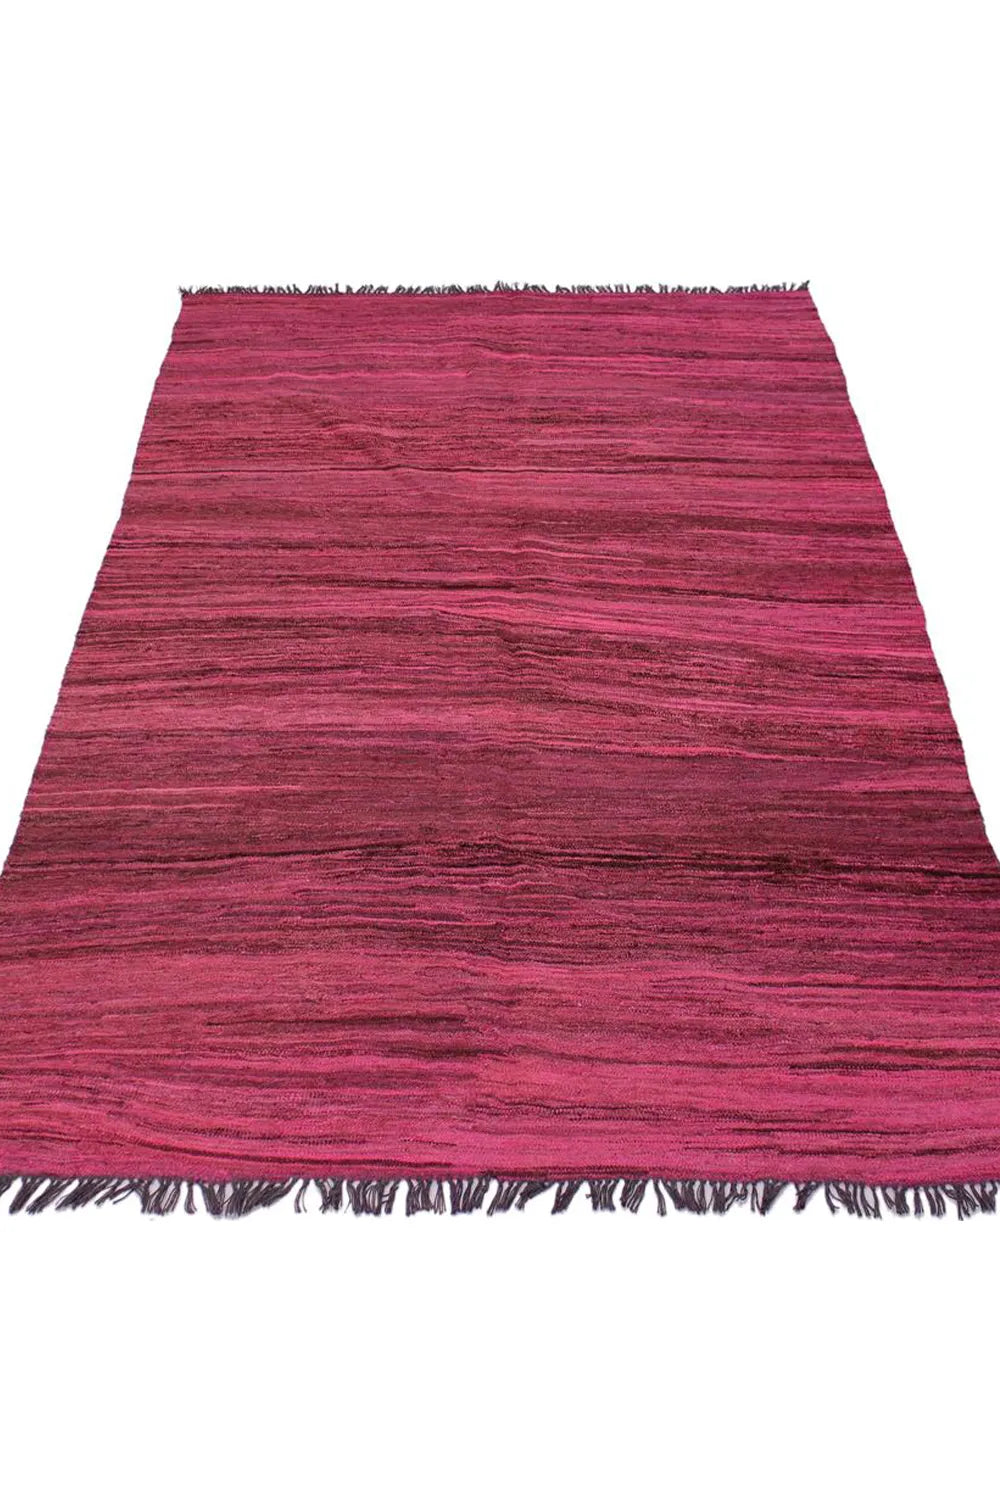 soft and durable pink area rug in a flatweave design for stylish interiors